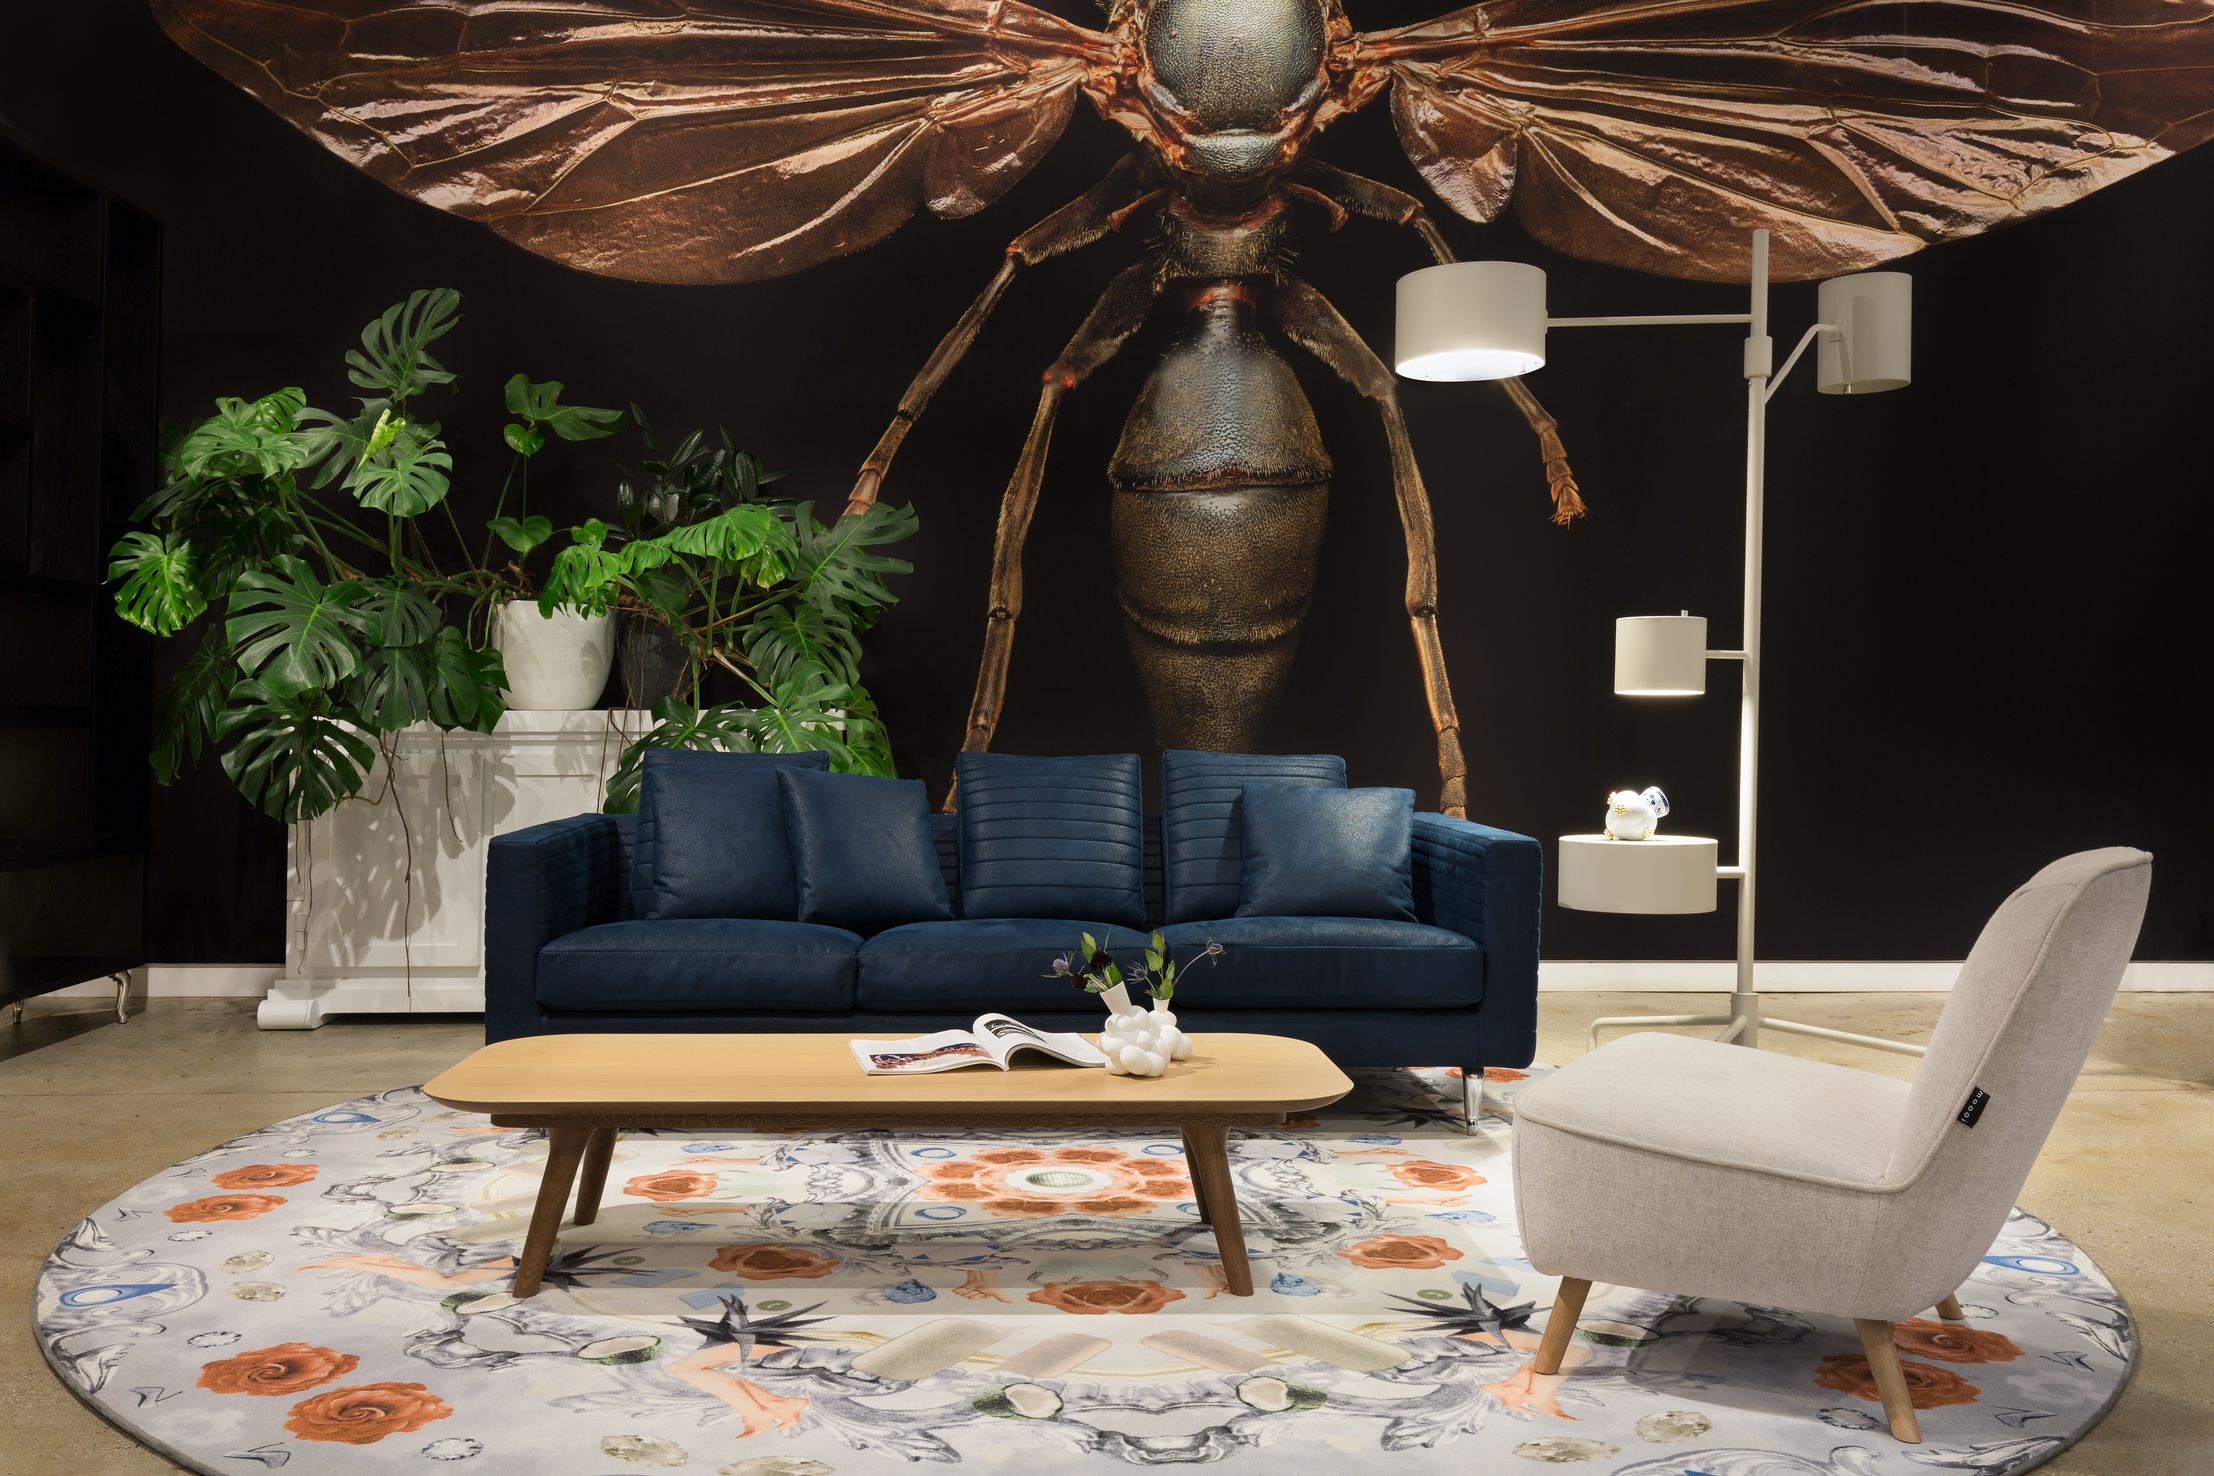 Interior of New York Showroom 2017 with Cocktail Chair, Statistocrat Floor Lamp and Moooi Carpet